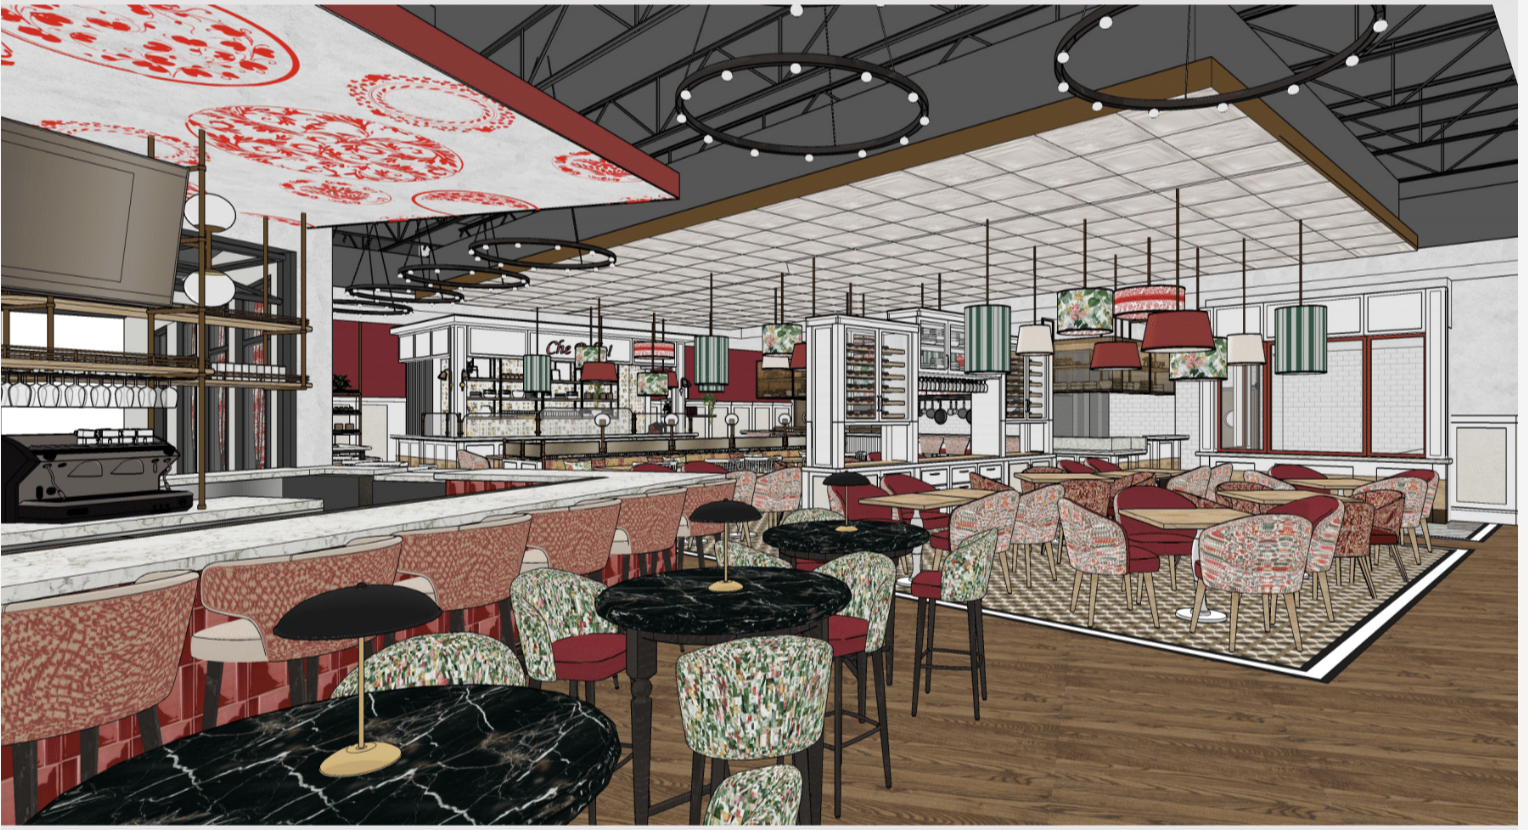 Rendering from Fiolina Pasta House